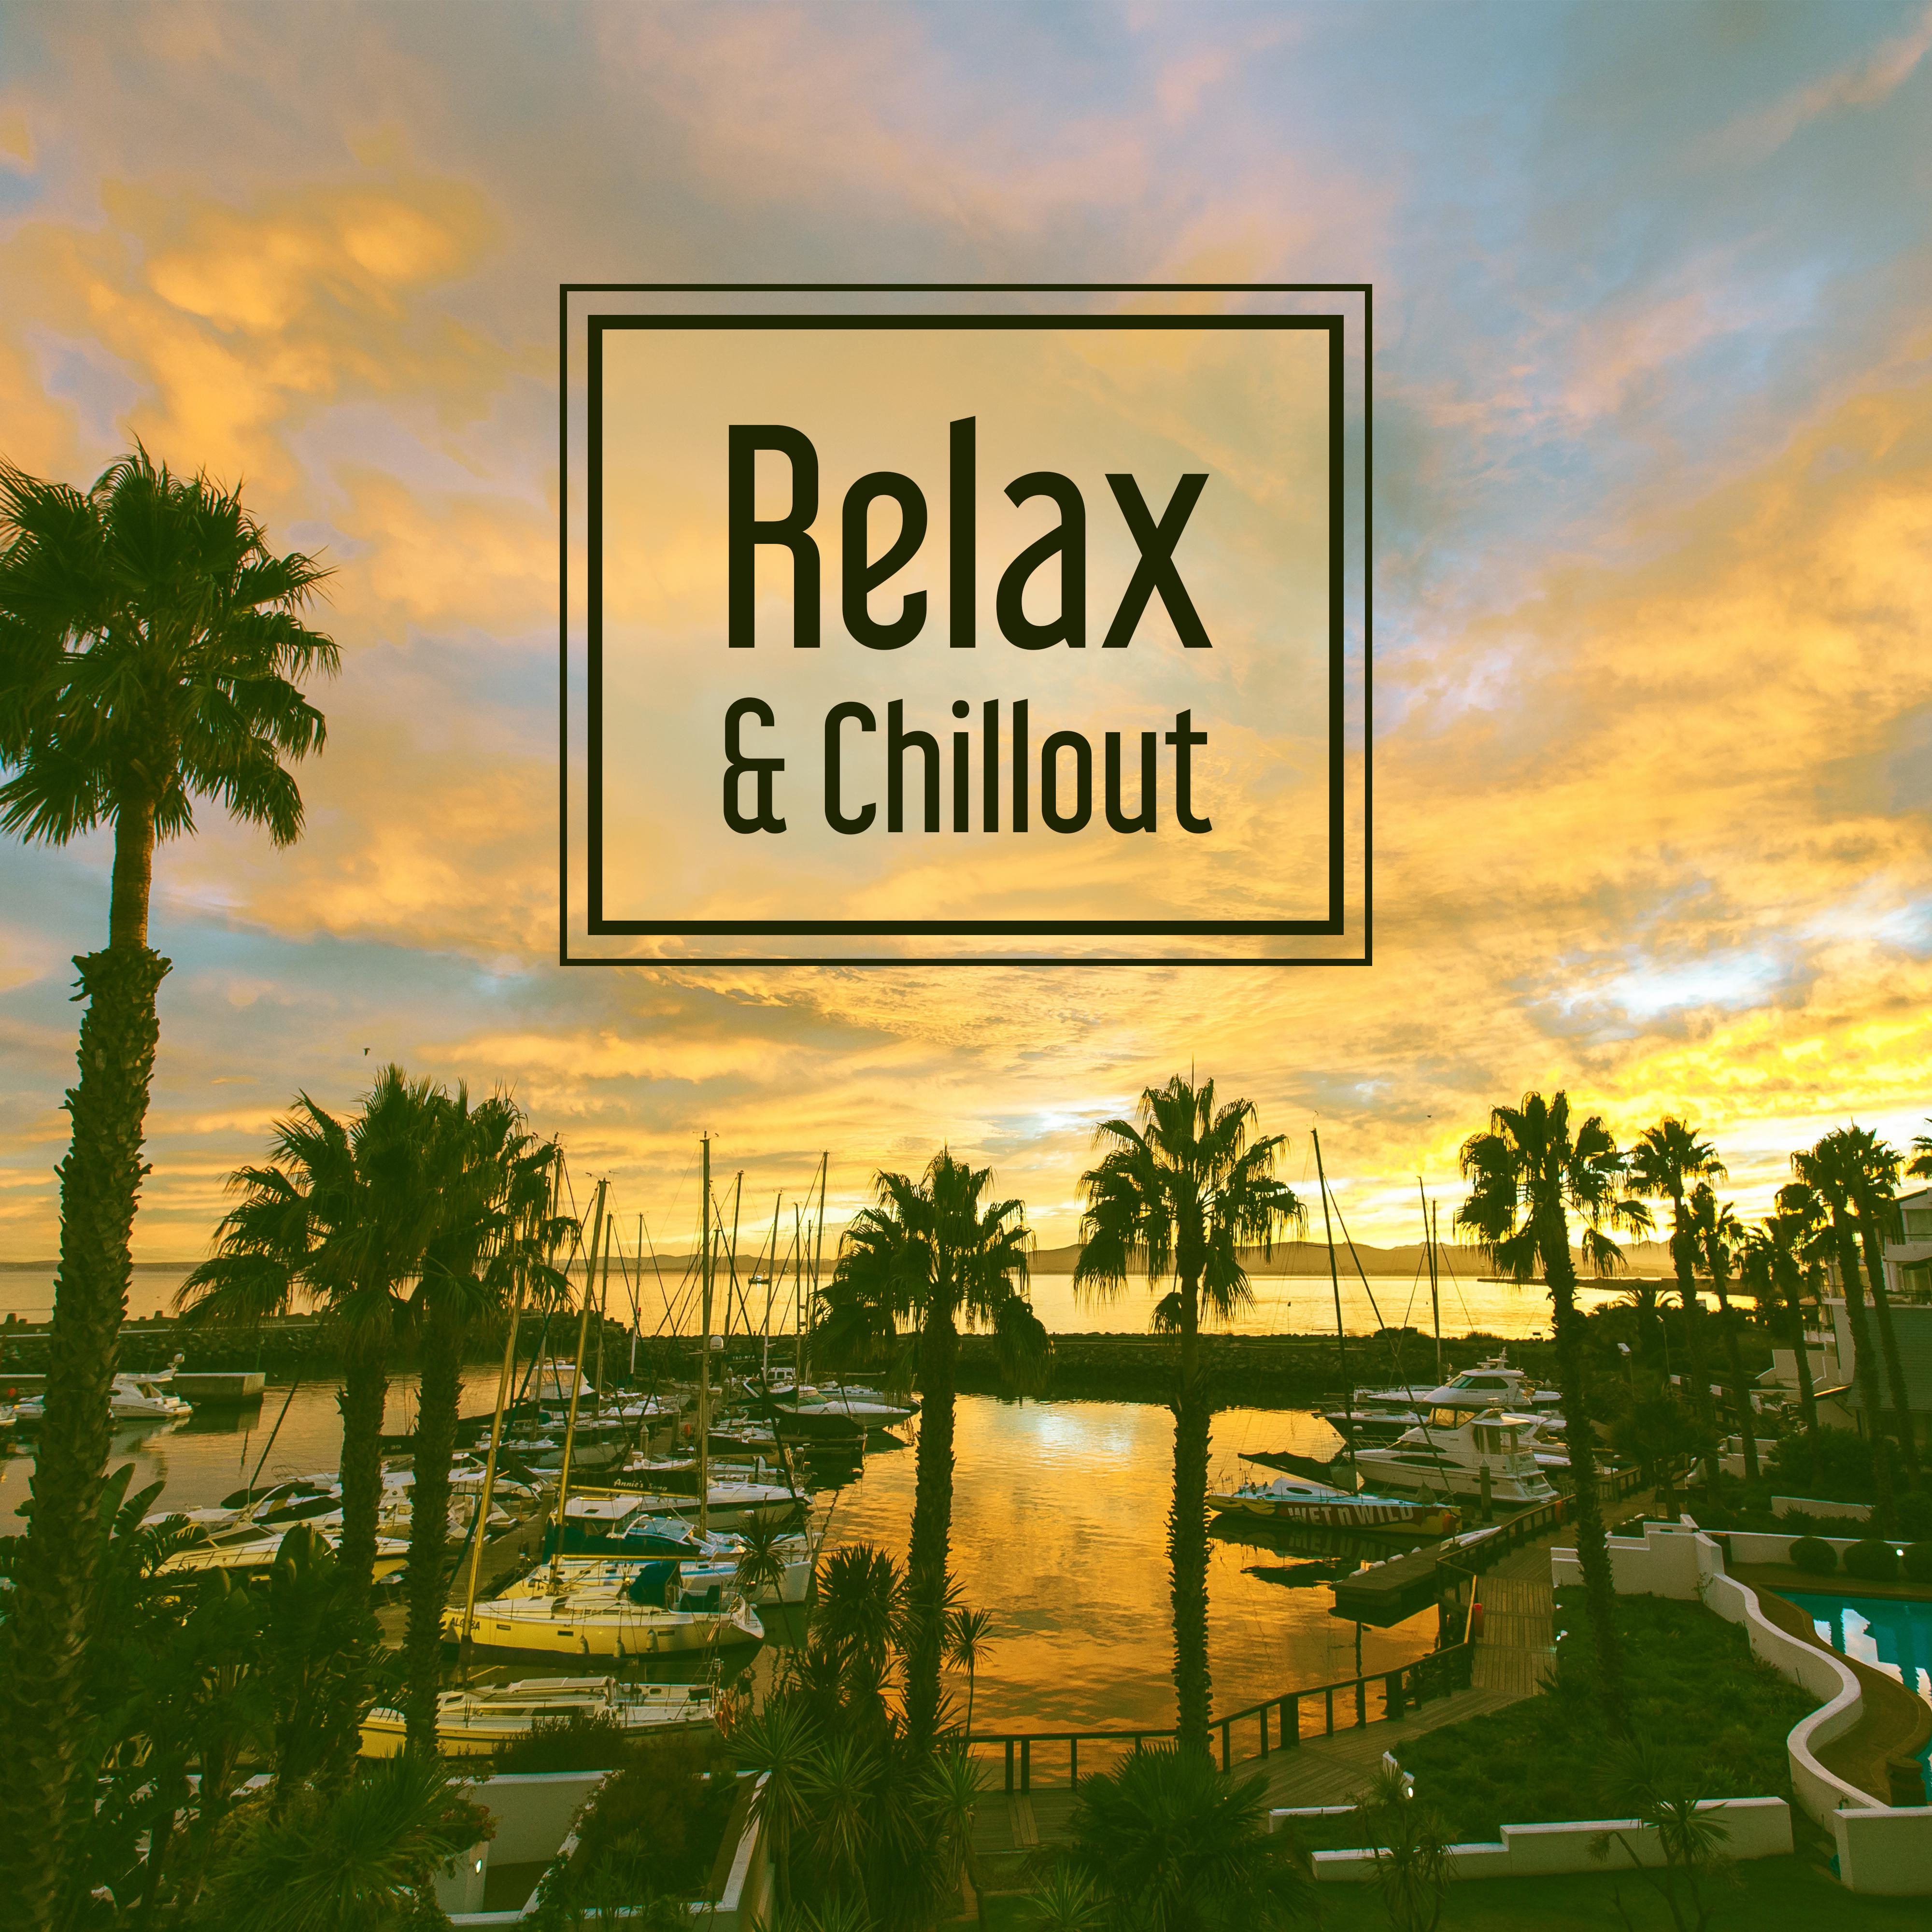 Relax & Chillout – Deep Chillout Music, Electronic Beats, Hits of Chill Out Music, Total Relaxation